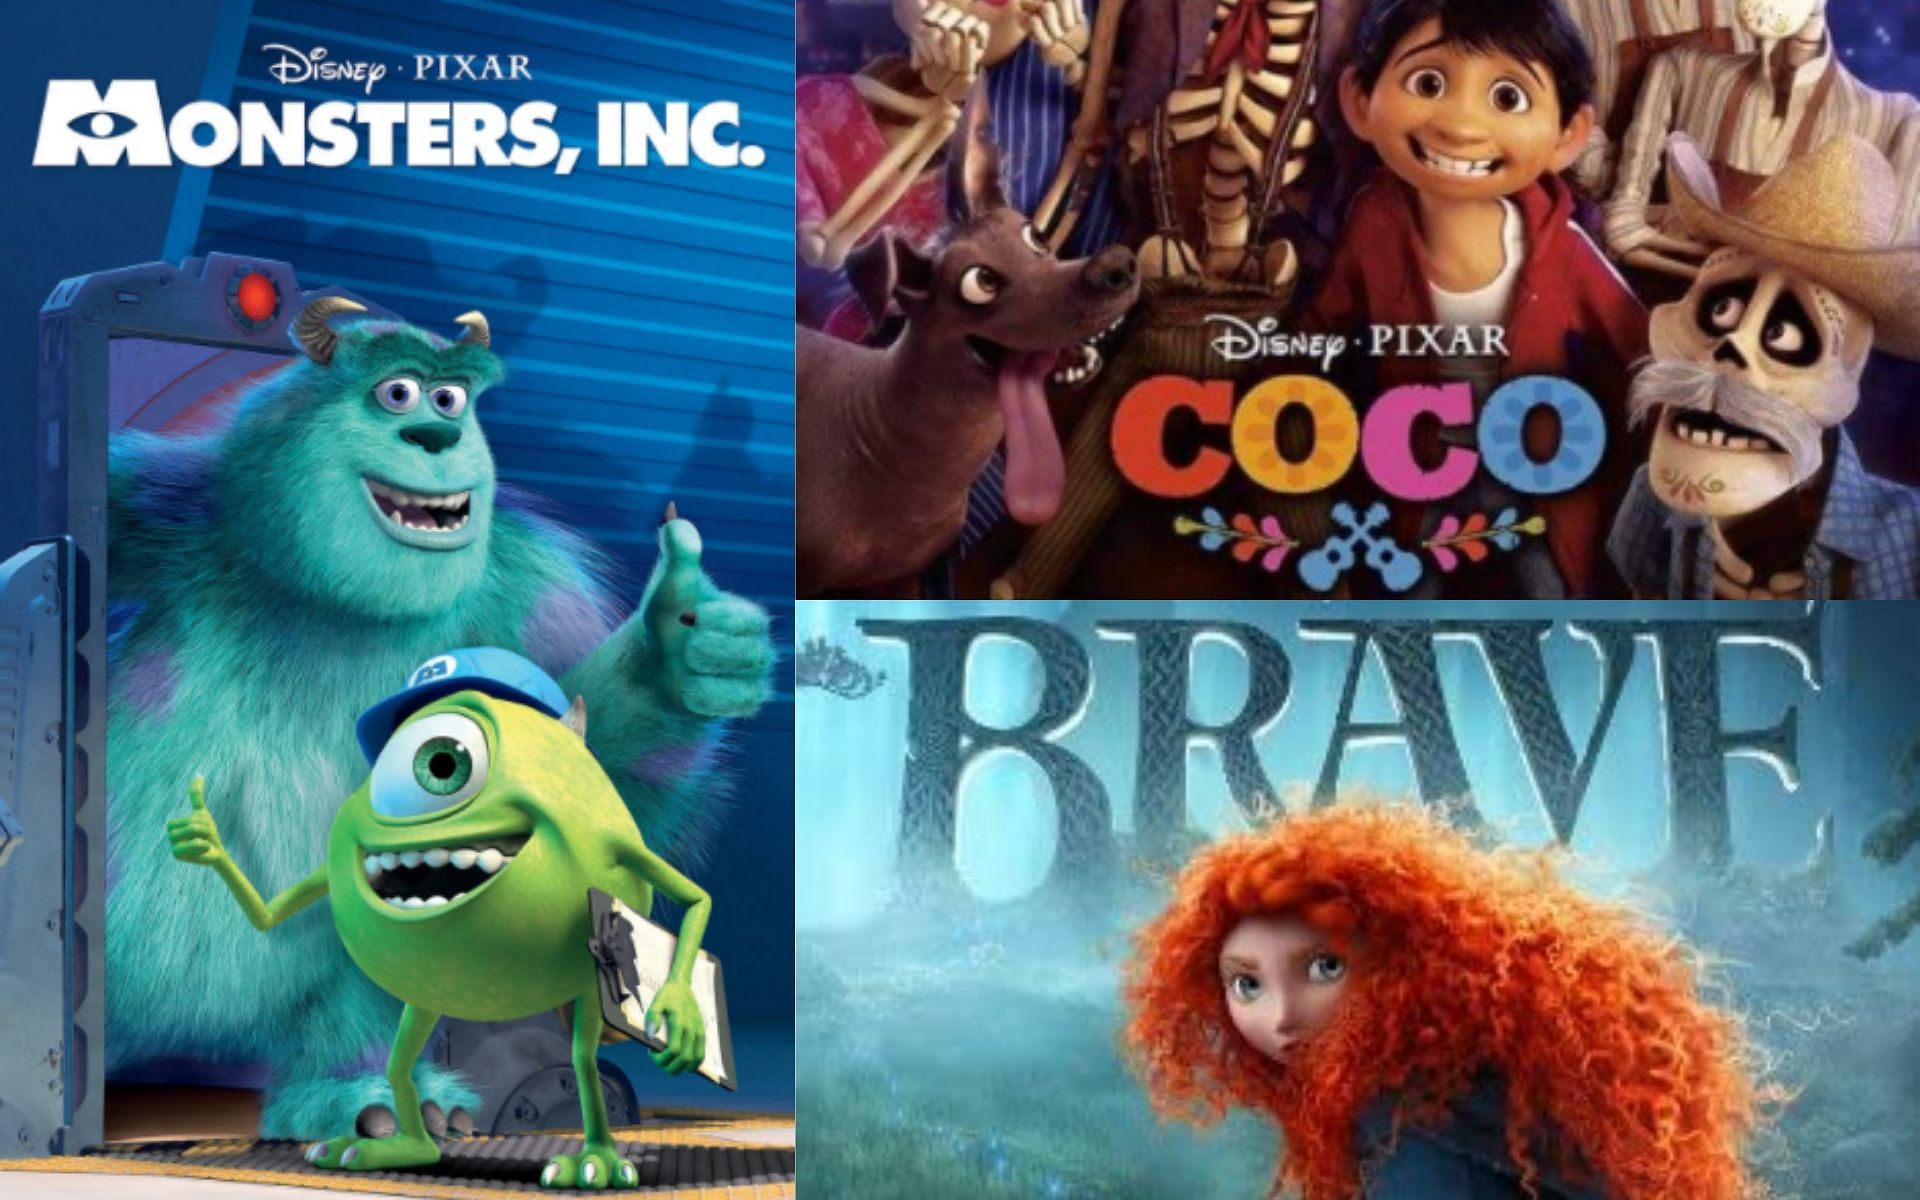 5 Pixar movies to watch if you liked Turning Red